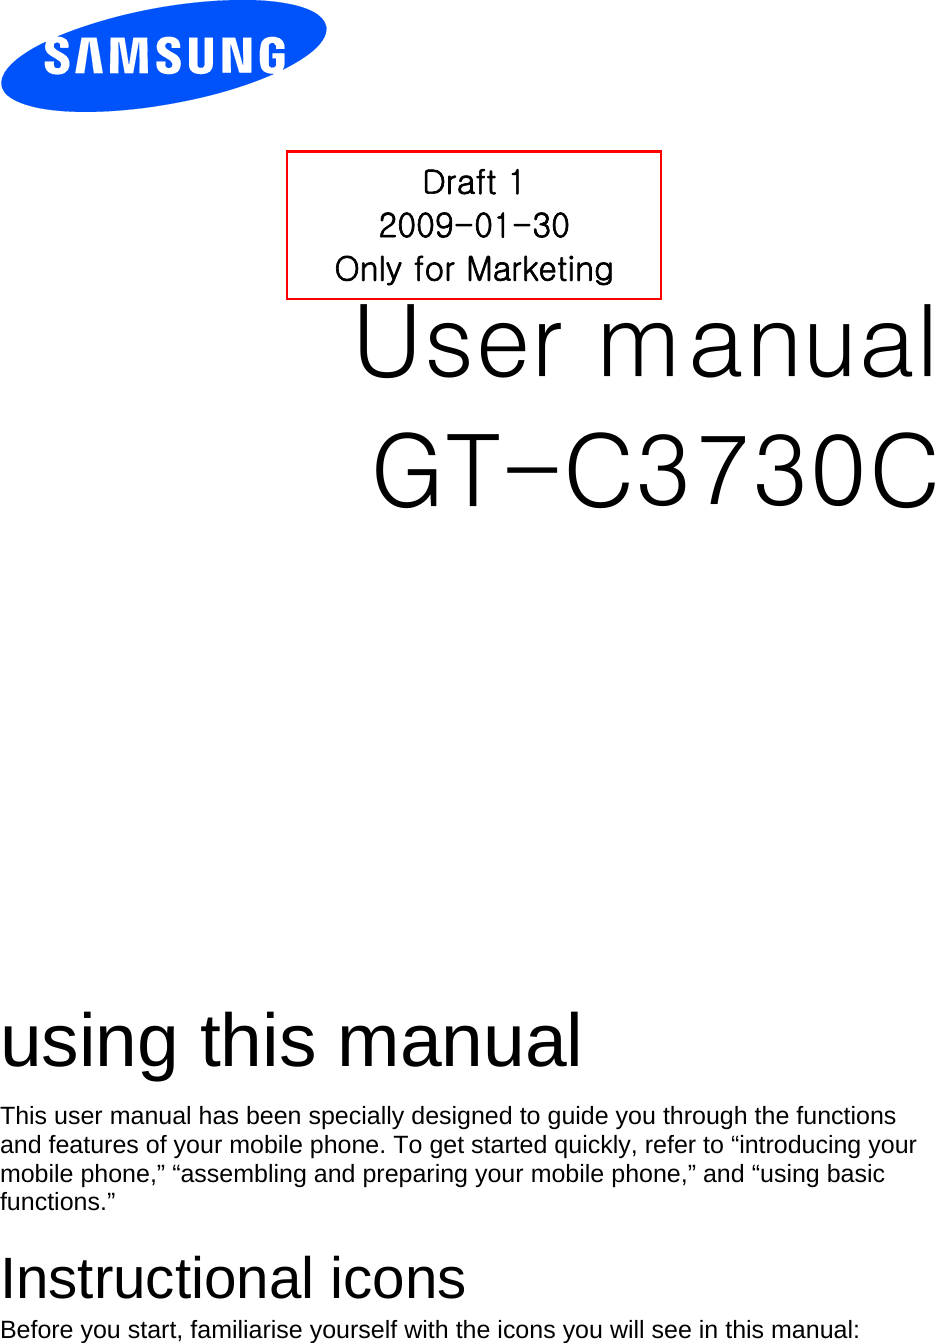            User manual Draft 1 2009-01-30 Only for Marketing GT-C3730C                  using this manual This user manual has been specially designed to guide you through the functions and features of your mobile phone. To get started quickly, refer to “introducing your mobile phone,” “assembling and preparing your mobile phone,” and “using basic functions.”  Instructional icons Before you start, familiarise yourself with the icons you will see in this manual:   